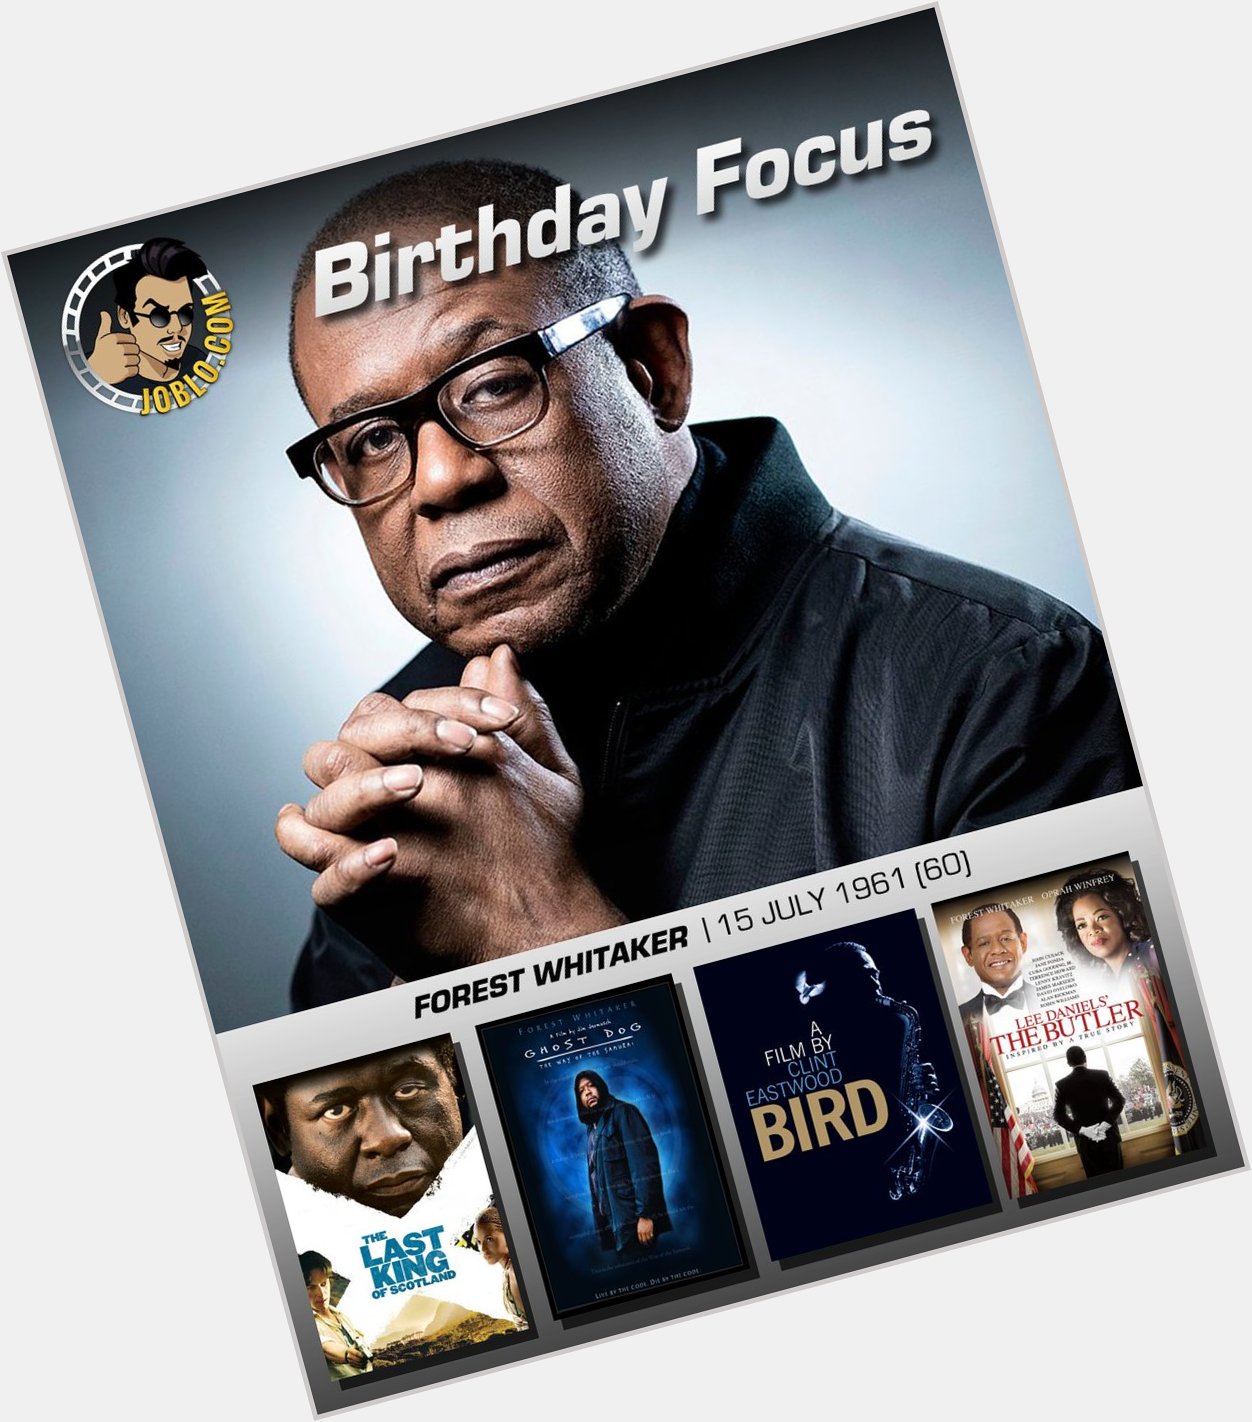 Wishing Forest Whitaker a very happy 60th birthday! 